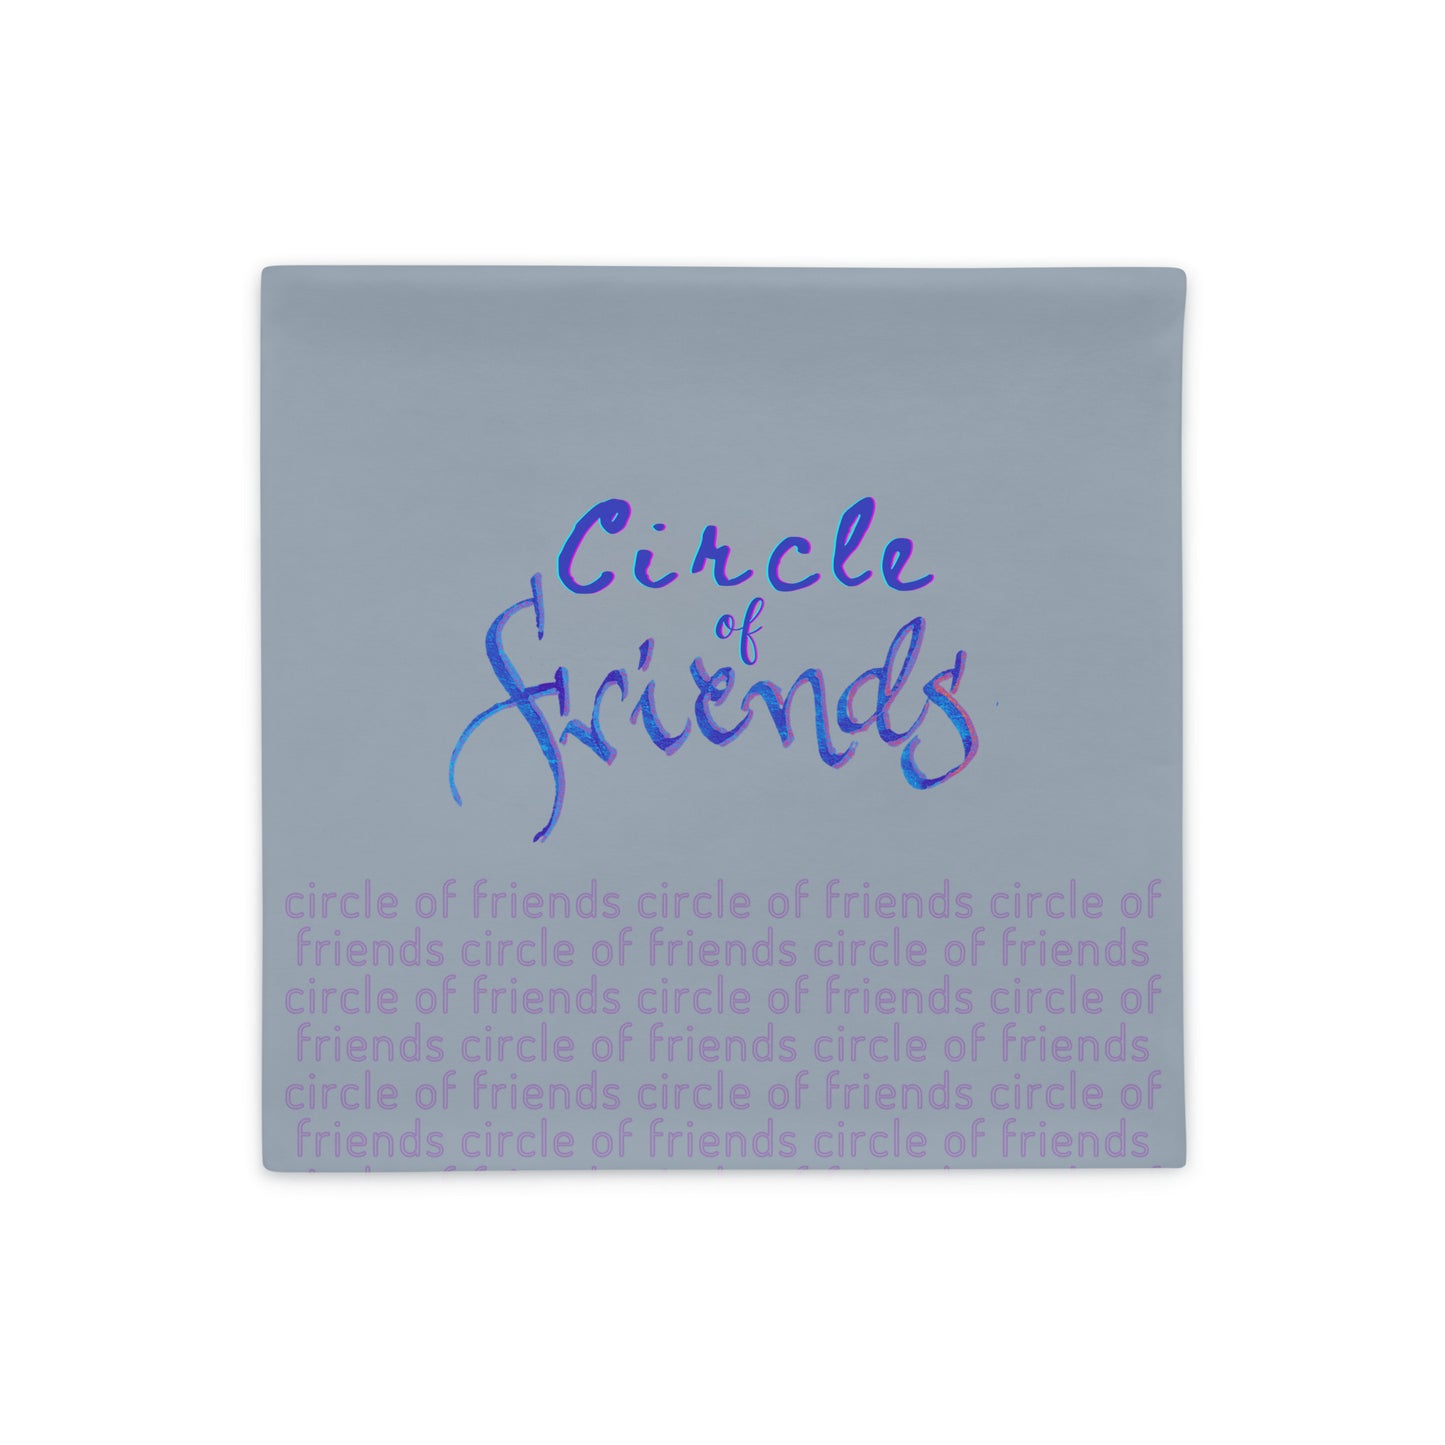 Circle of Friends: Cushion Covers